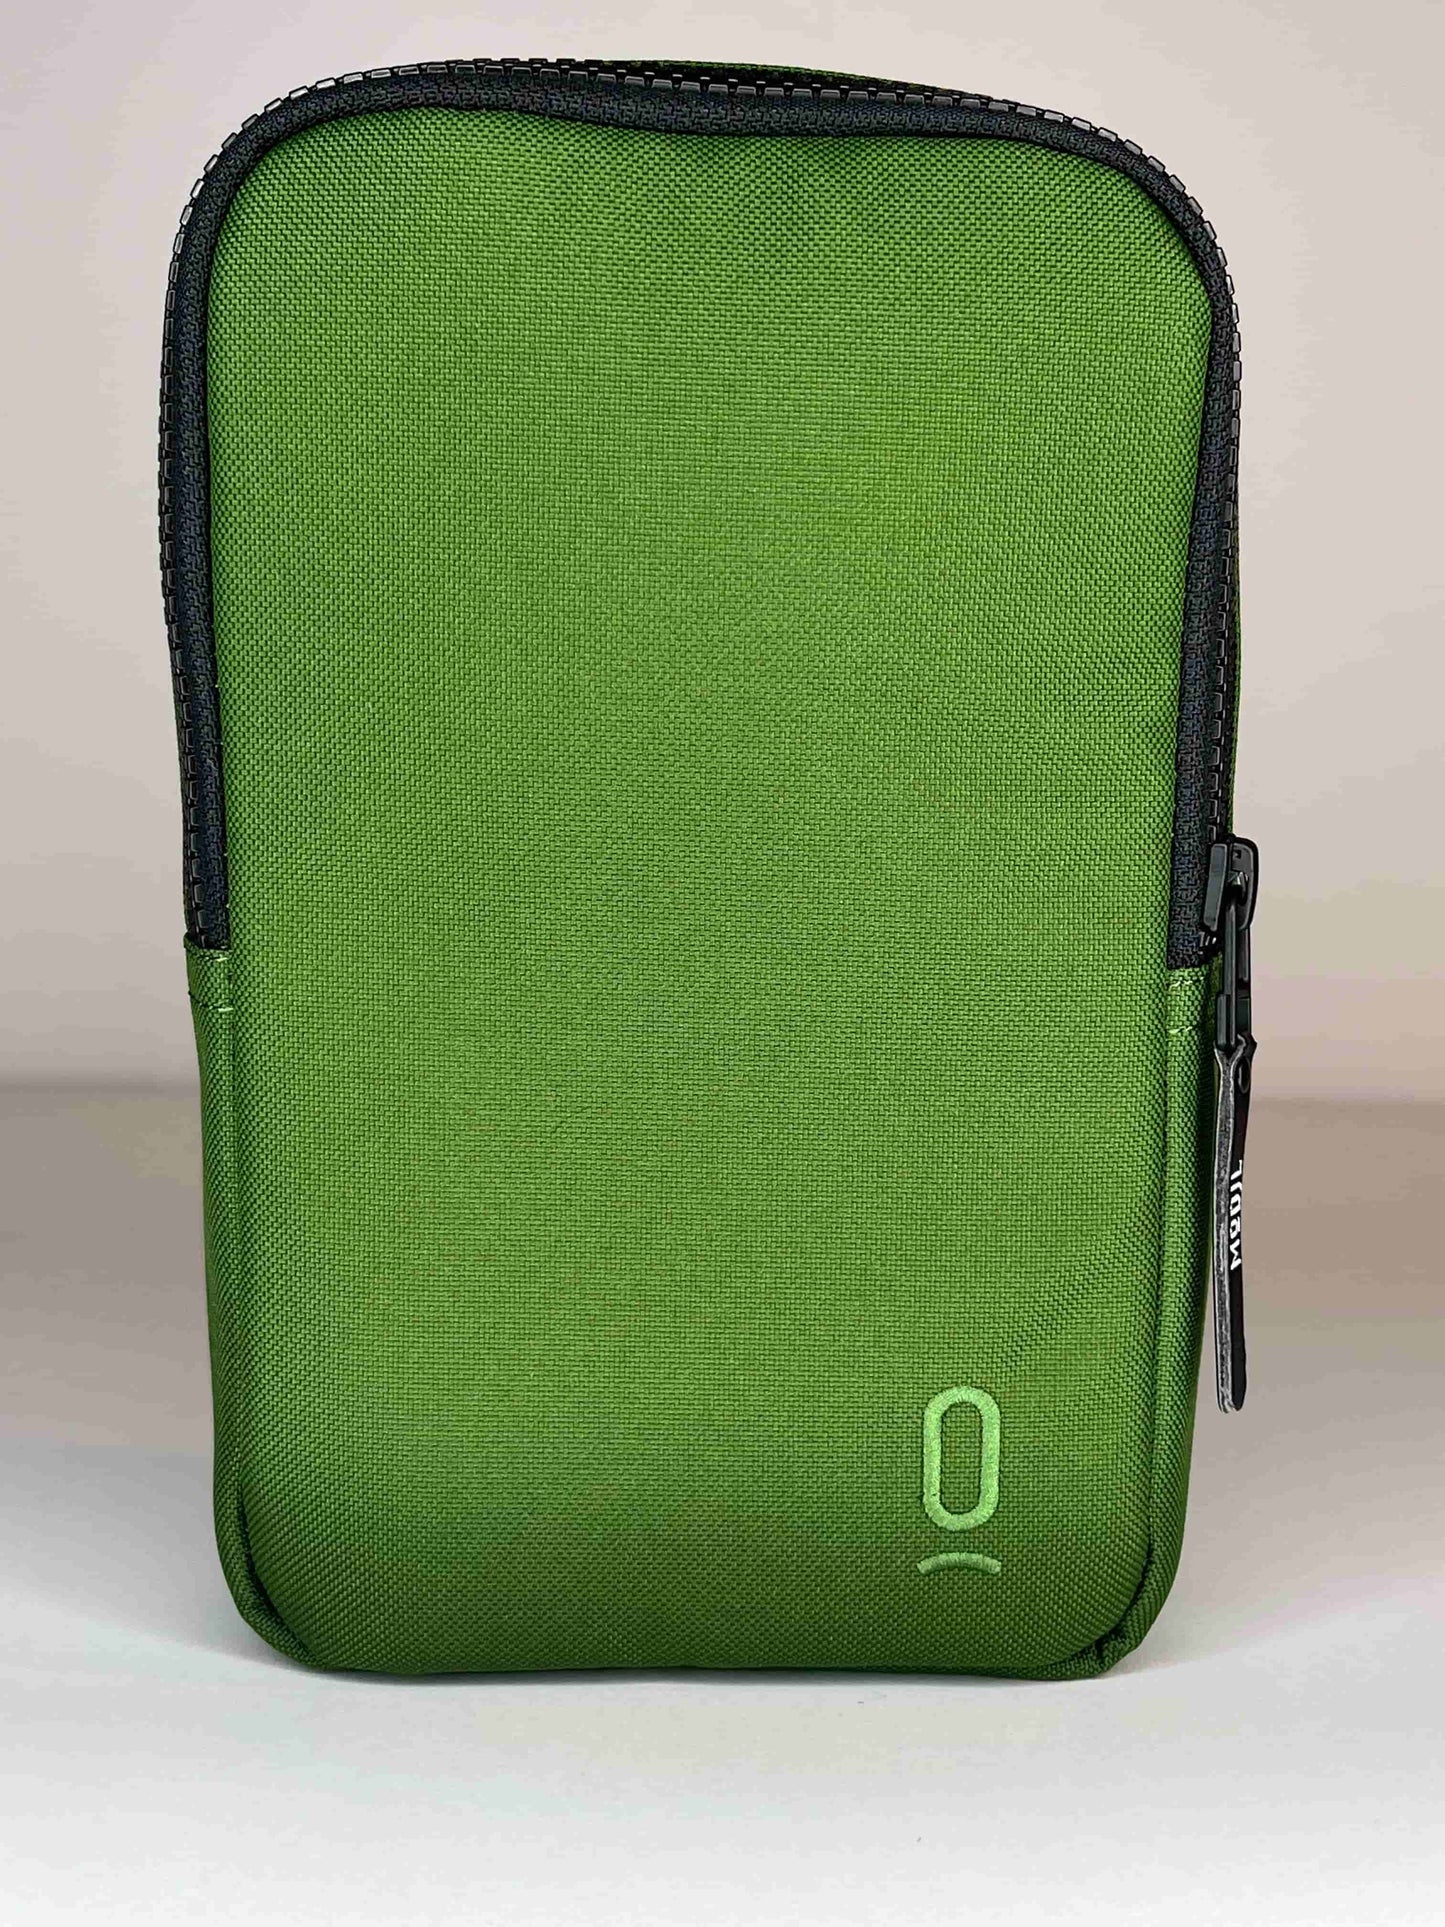 the-slim-pouch-modjl-modular-slimpouch-green